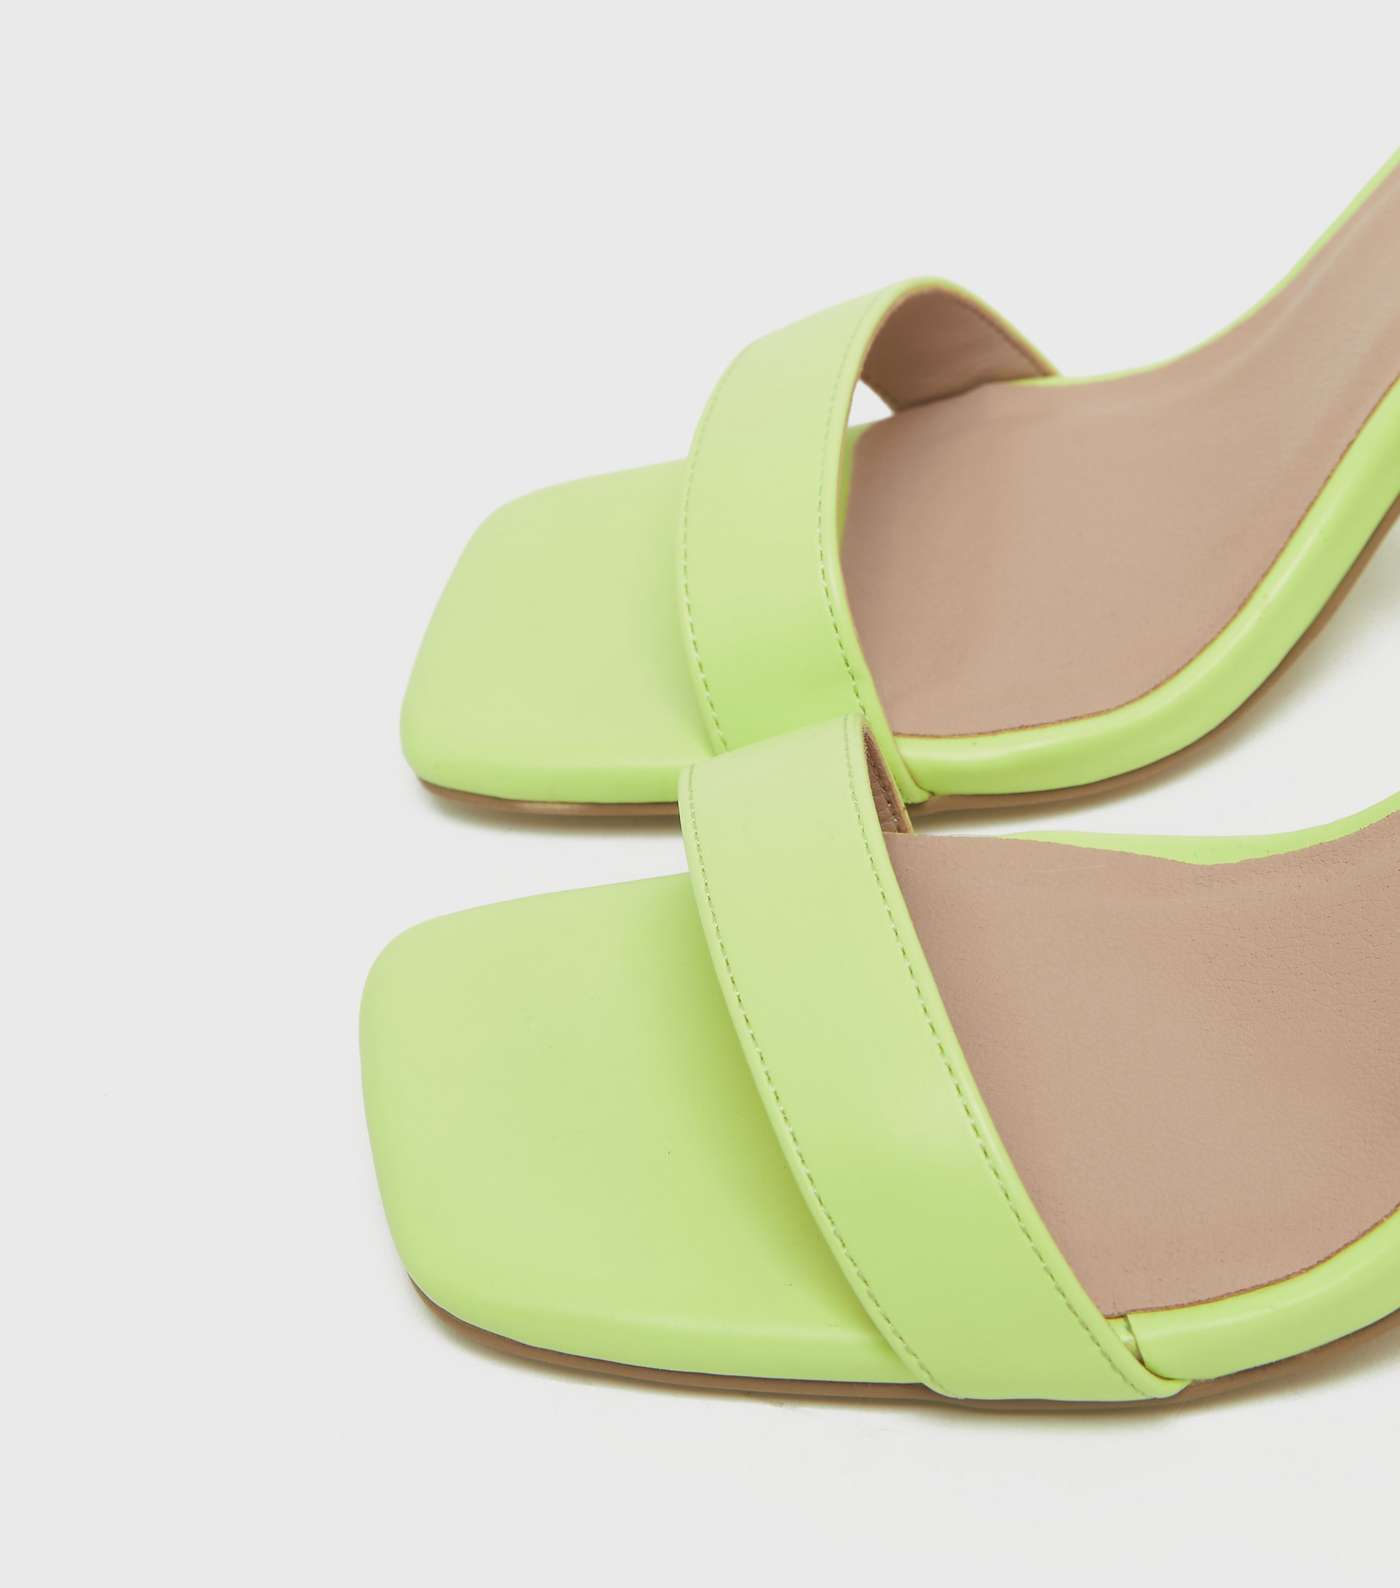 Green Leather-Look Strappy Stiletto Heel Sandals Image 3